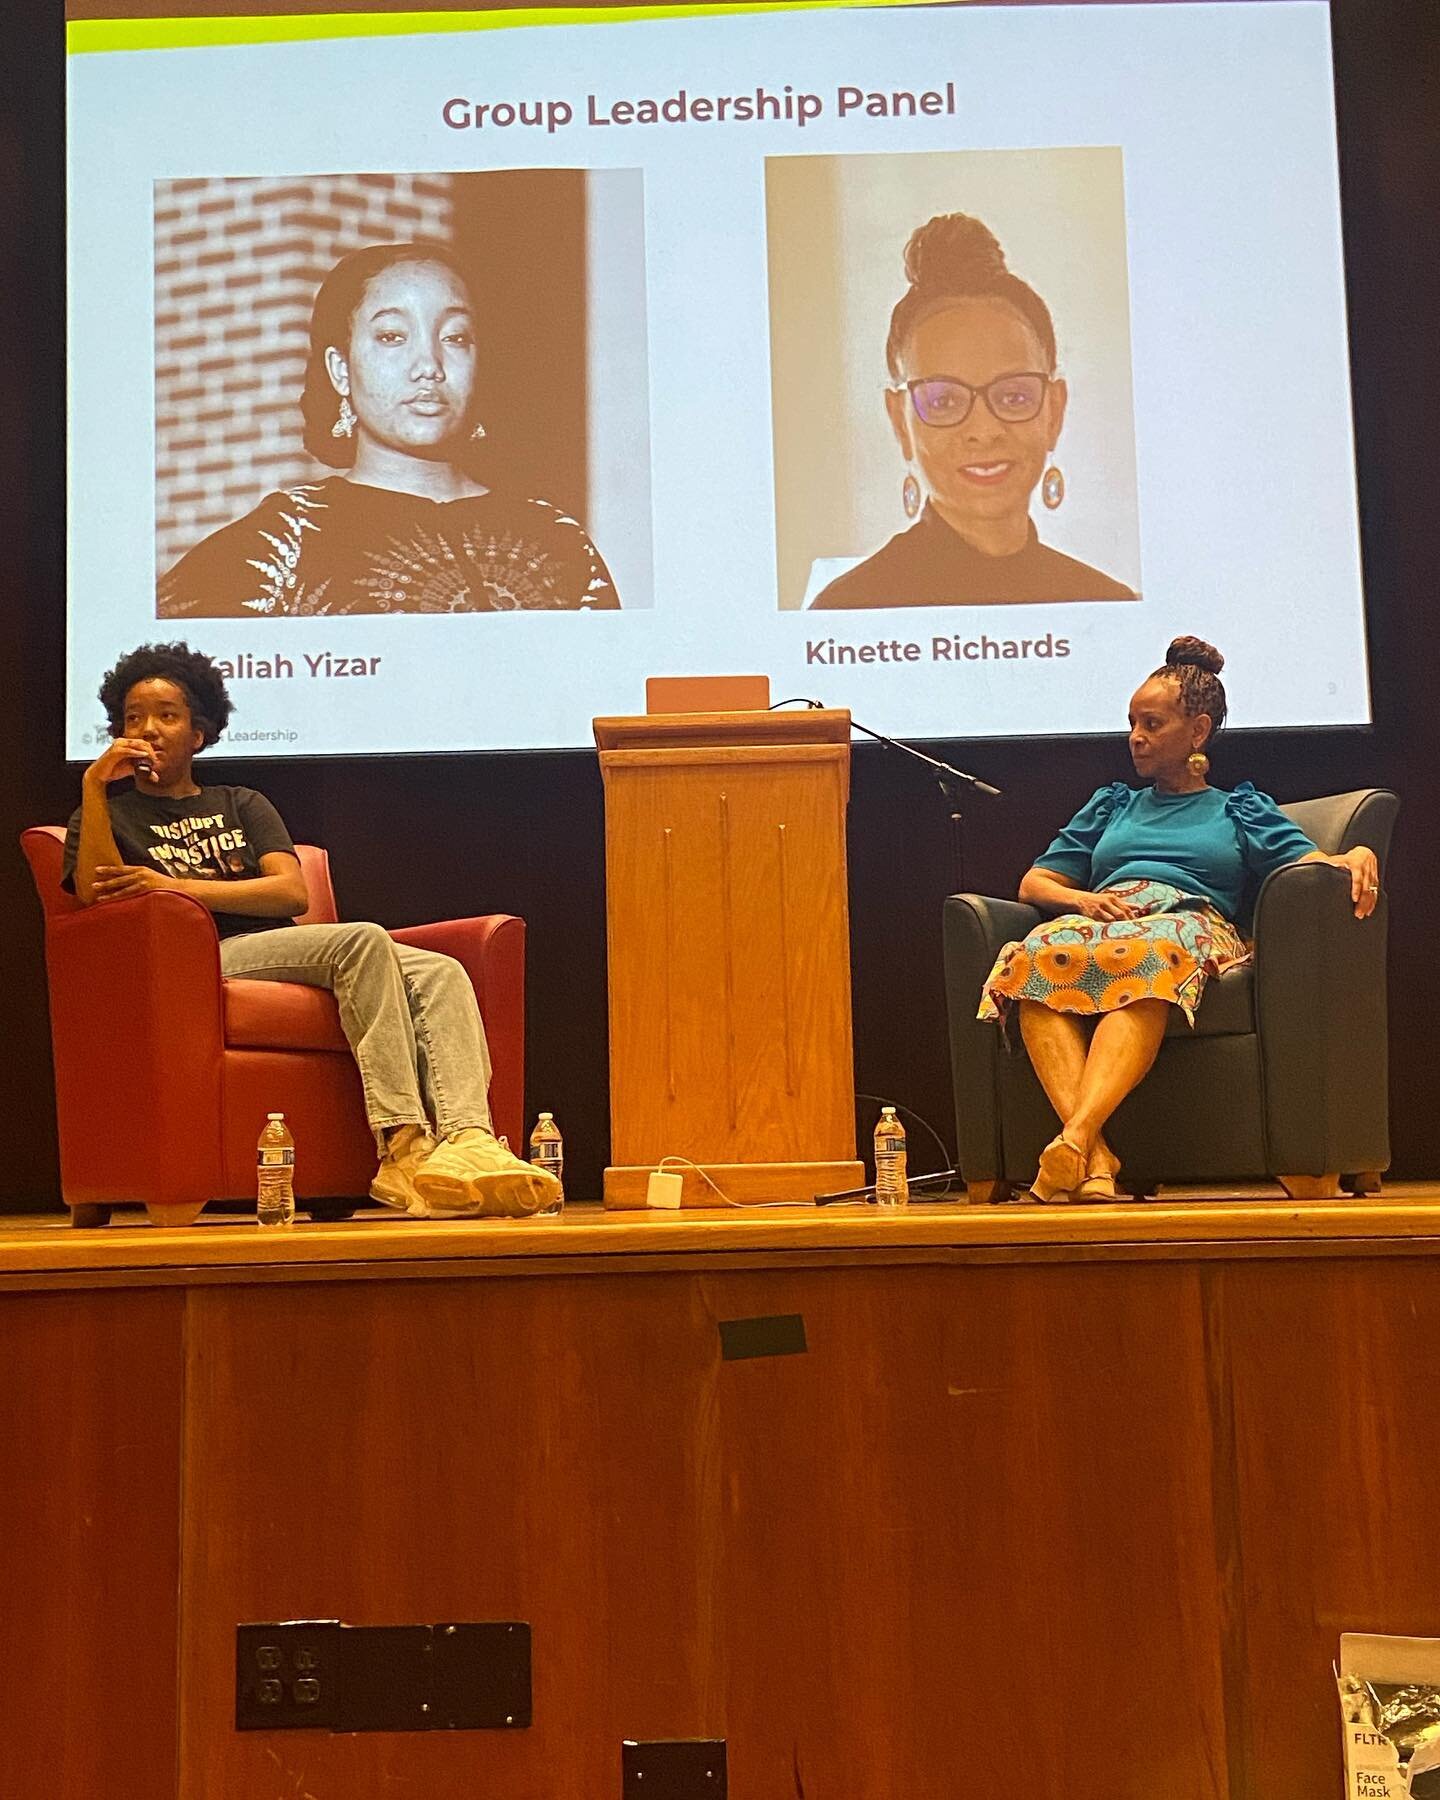 &ldquo;How do I pay this world forward and how do I pay this world backward? Did I leave this place better than when I found it?&rdquo; 

Powerful words from our group panelists, Kaliah Yizar and Dr. Kinette Richards. We are so grateful they could co